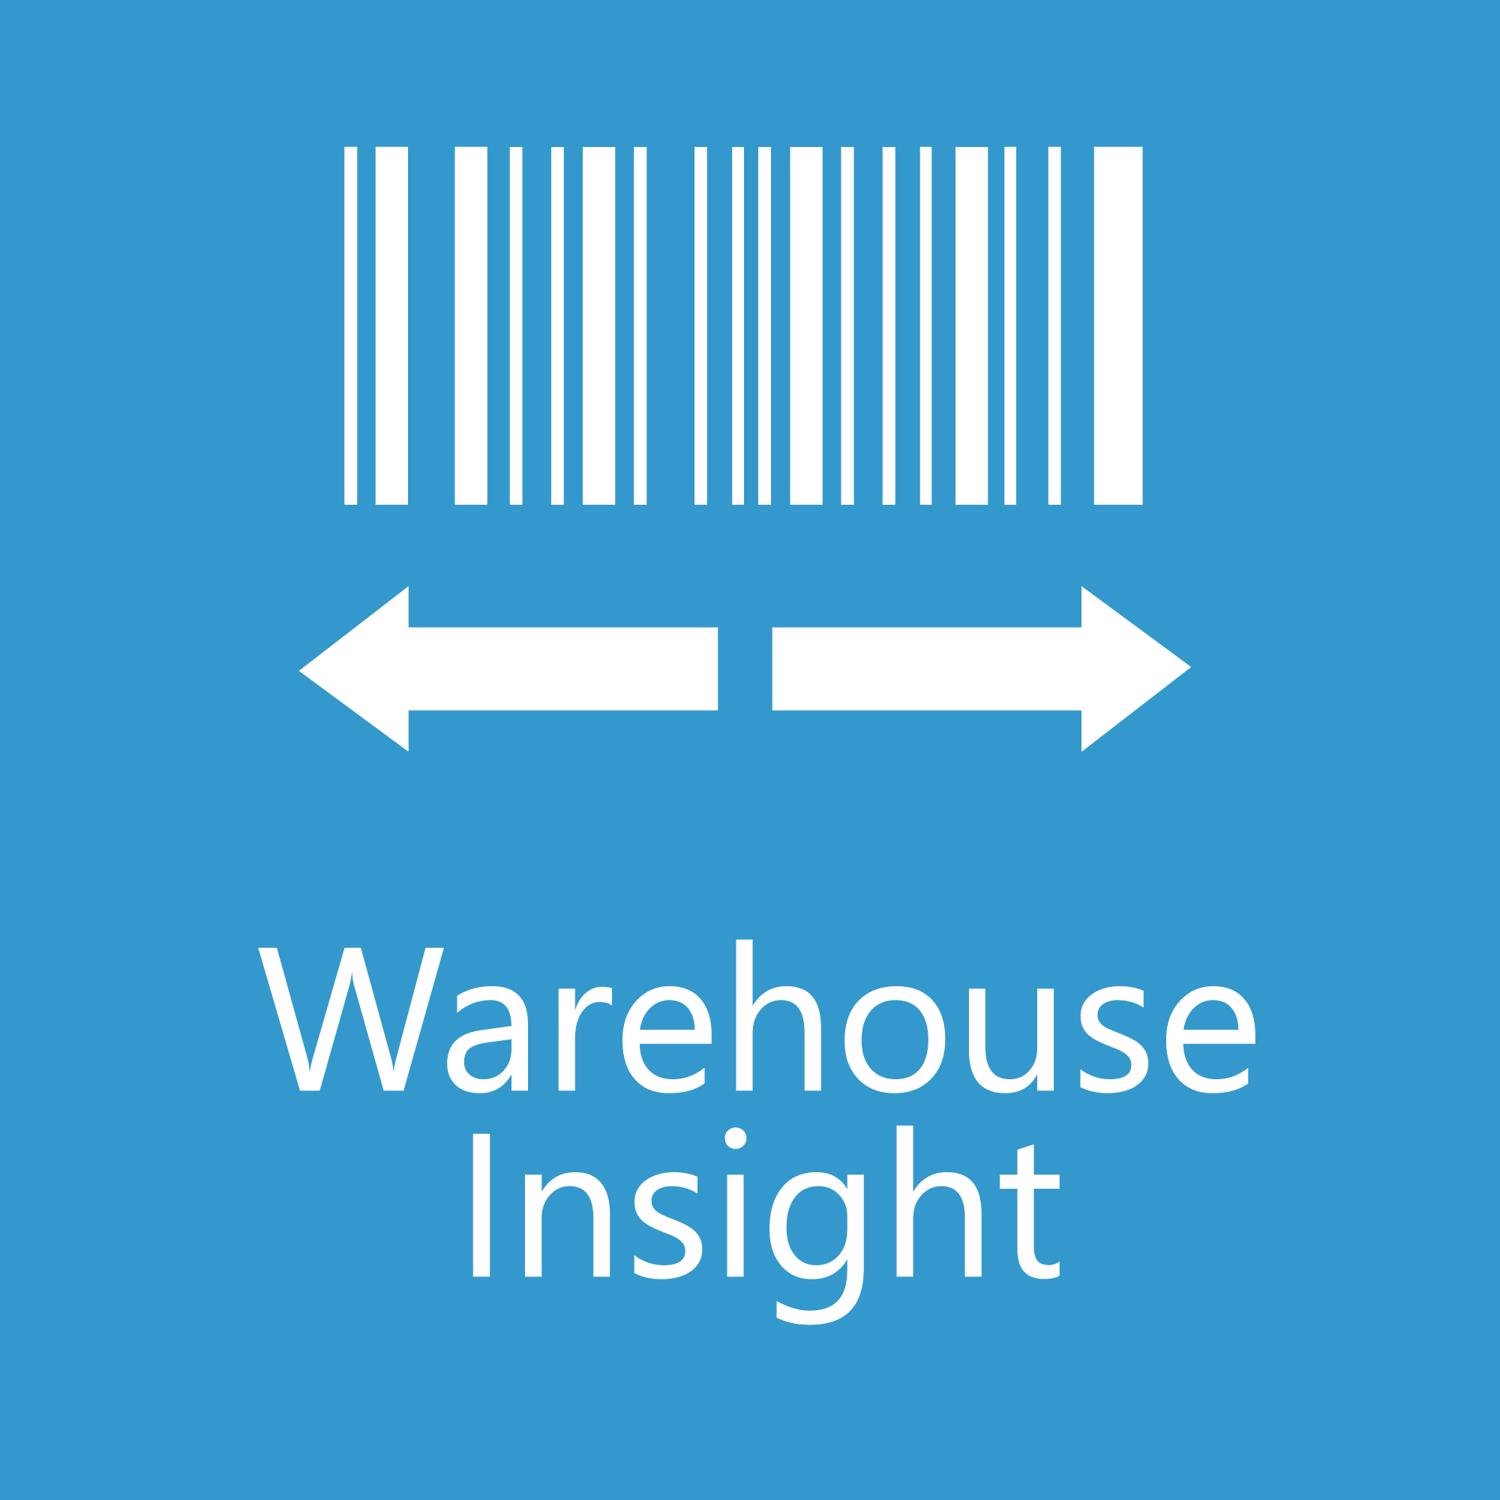 Insight works | Warehouse Insight - Per Device